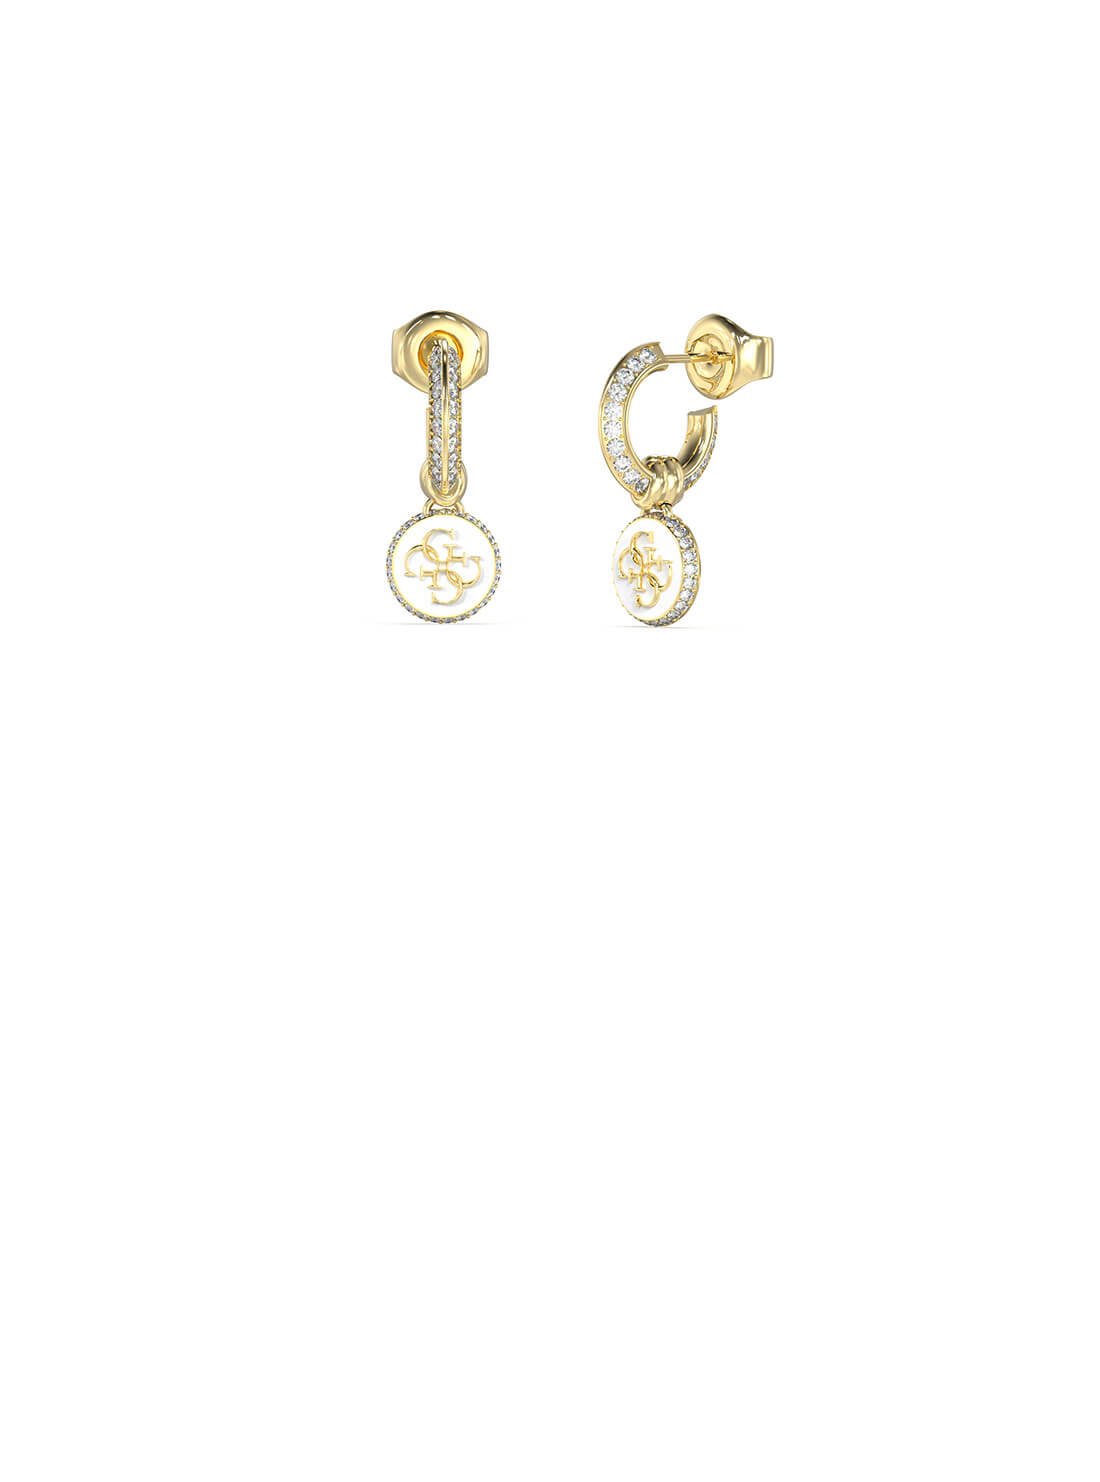 Gold Knot You White Crystal Stud Earrings | GUESS Women's Jewellery | front view